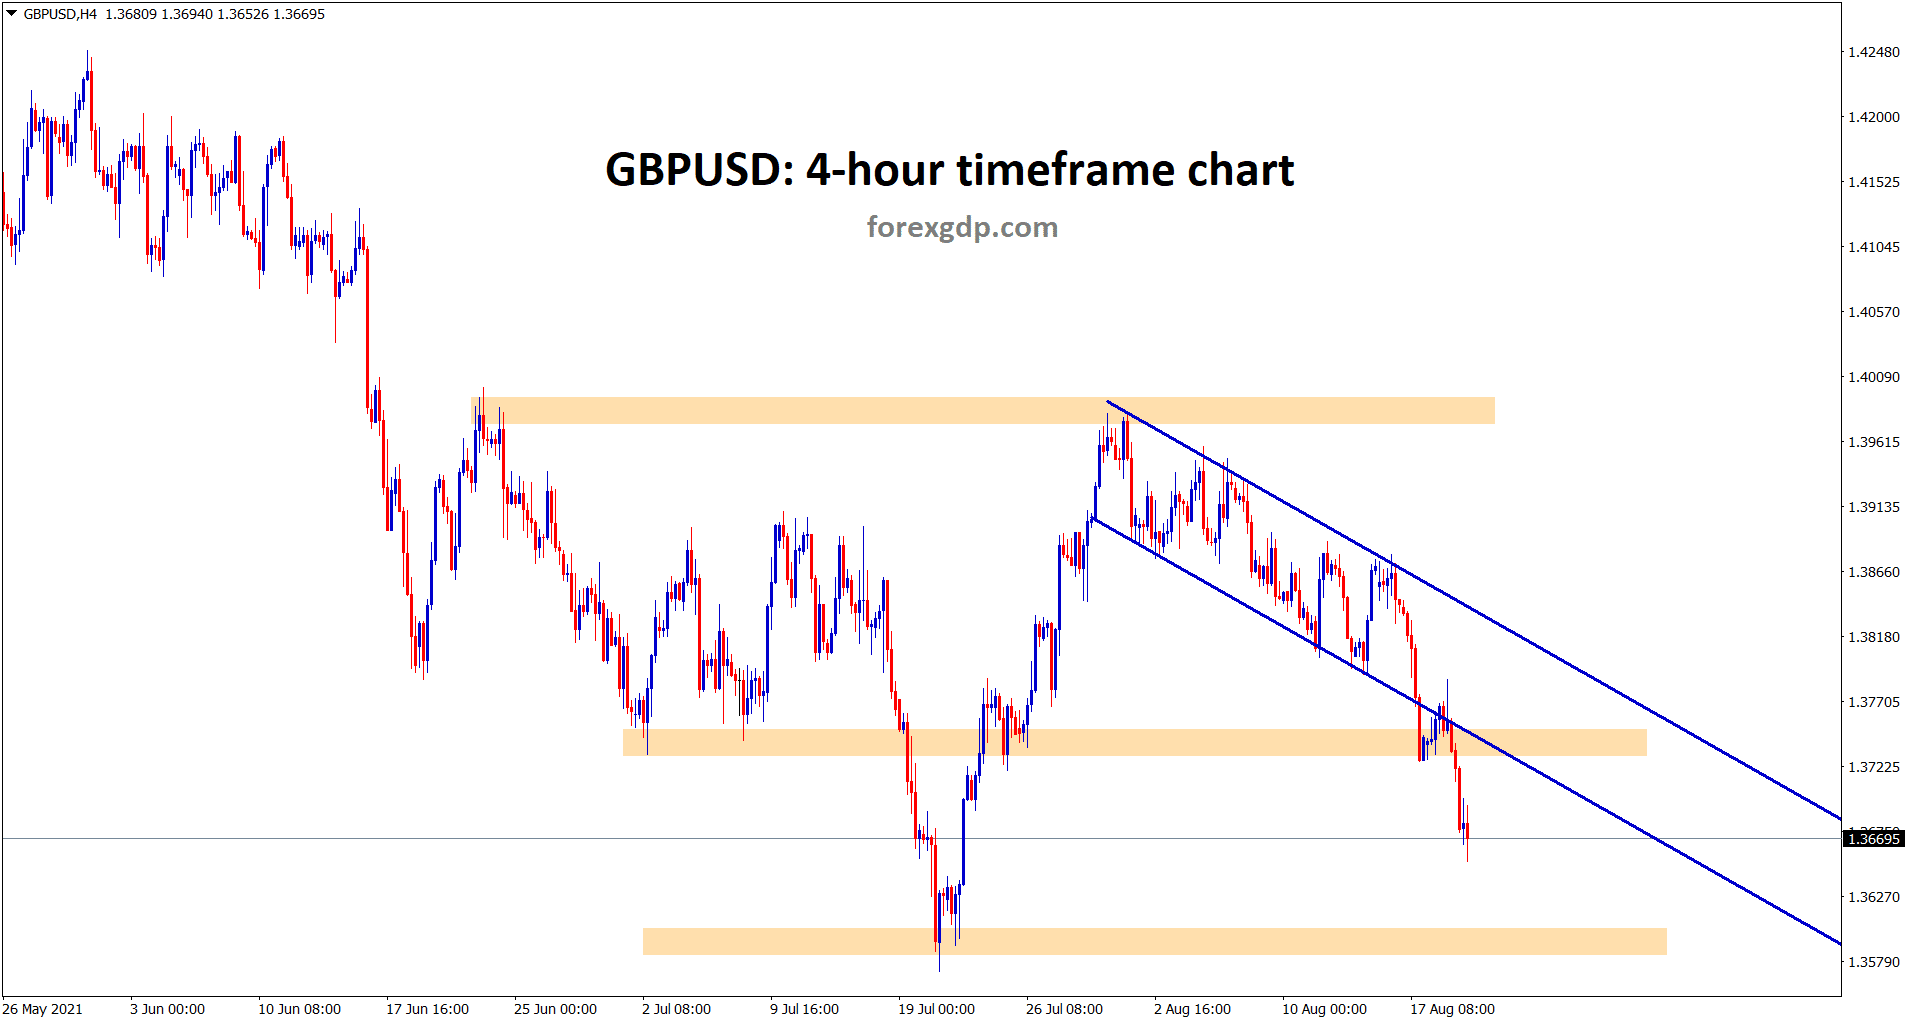 GBPUSD has broken the bottom of the descending channel and horizontal support